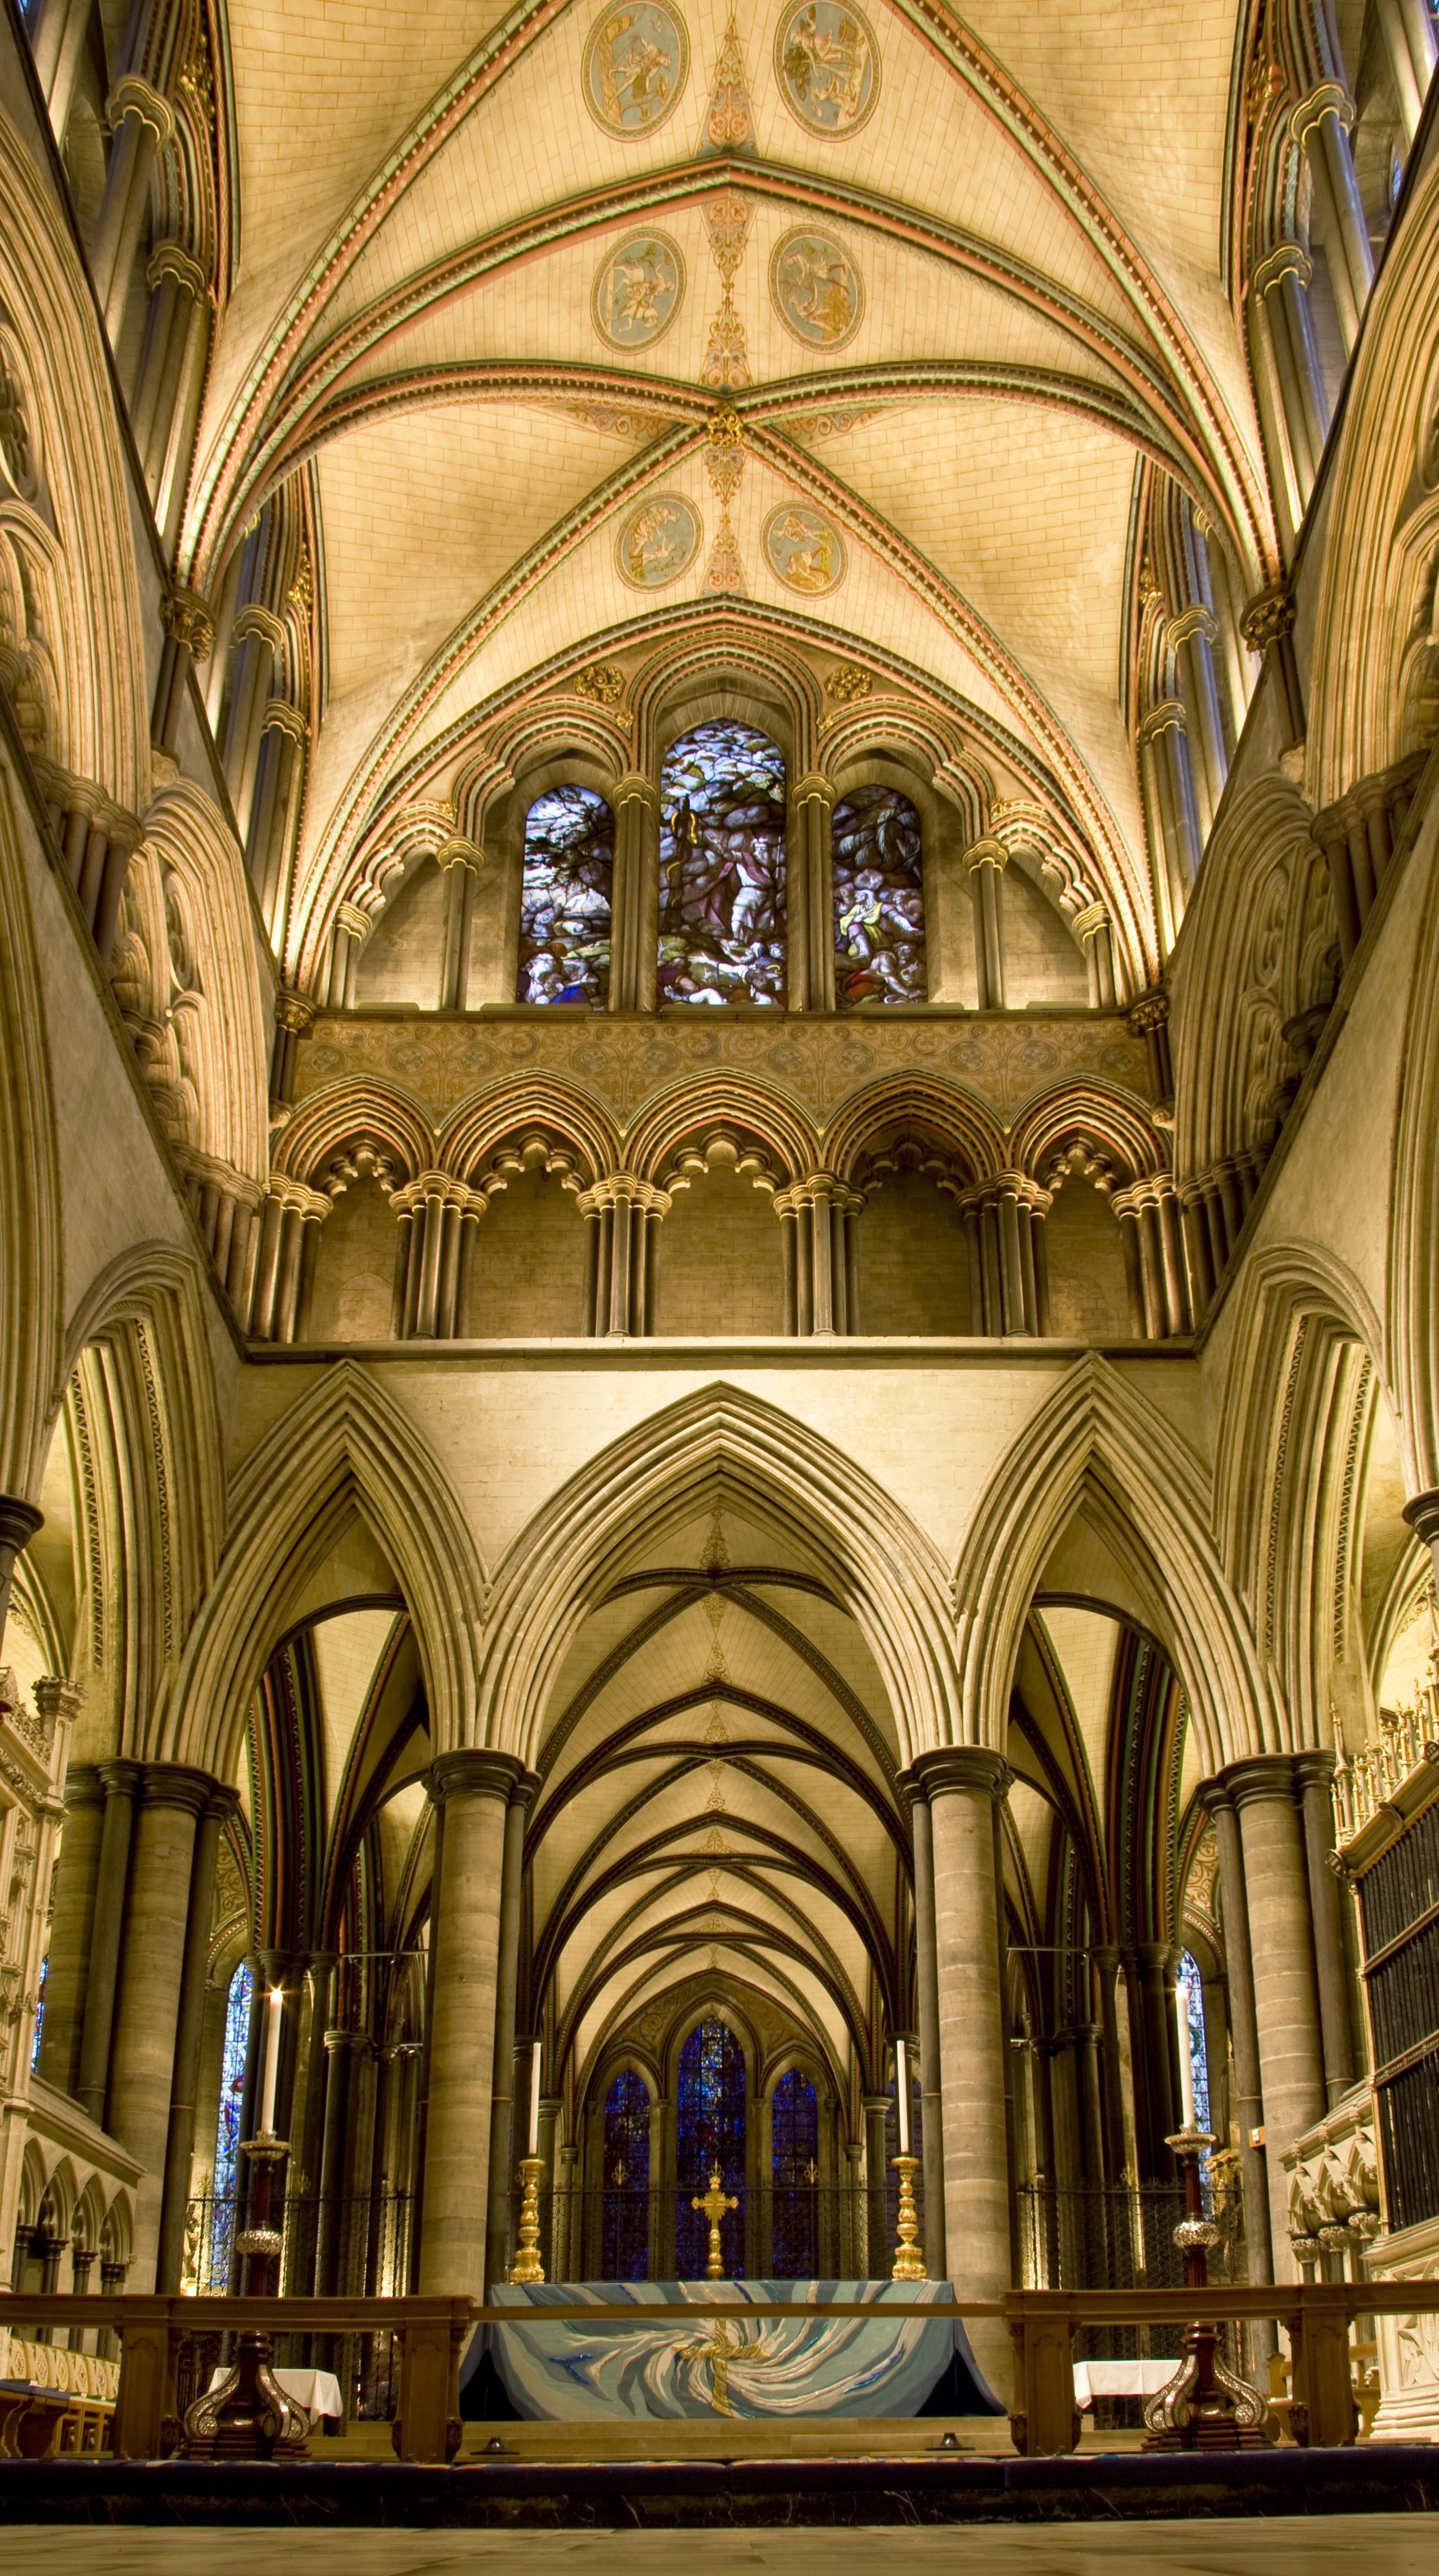 Inside the cathedral photo